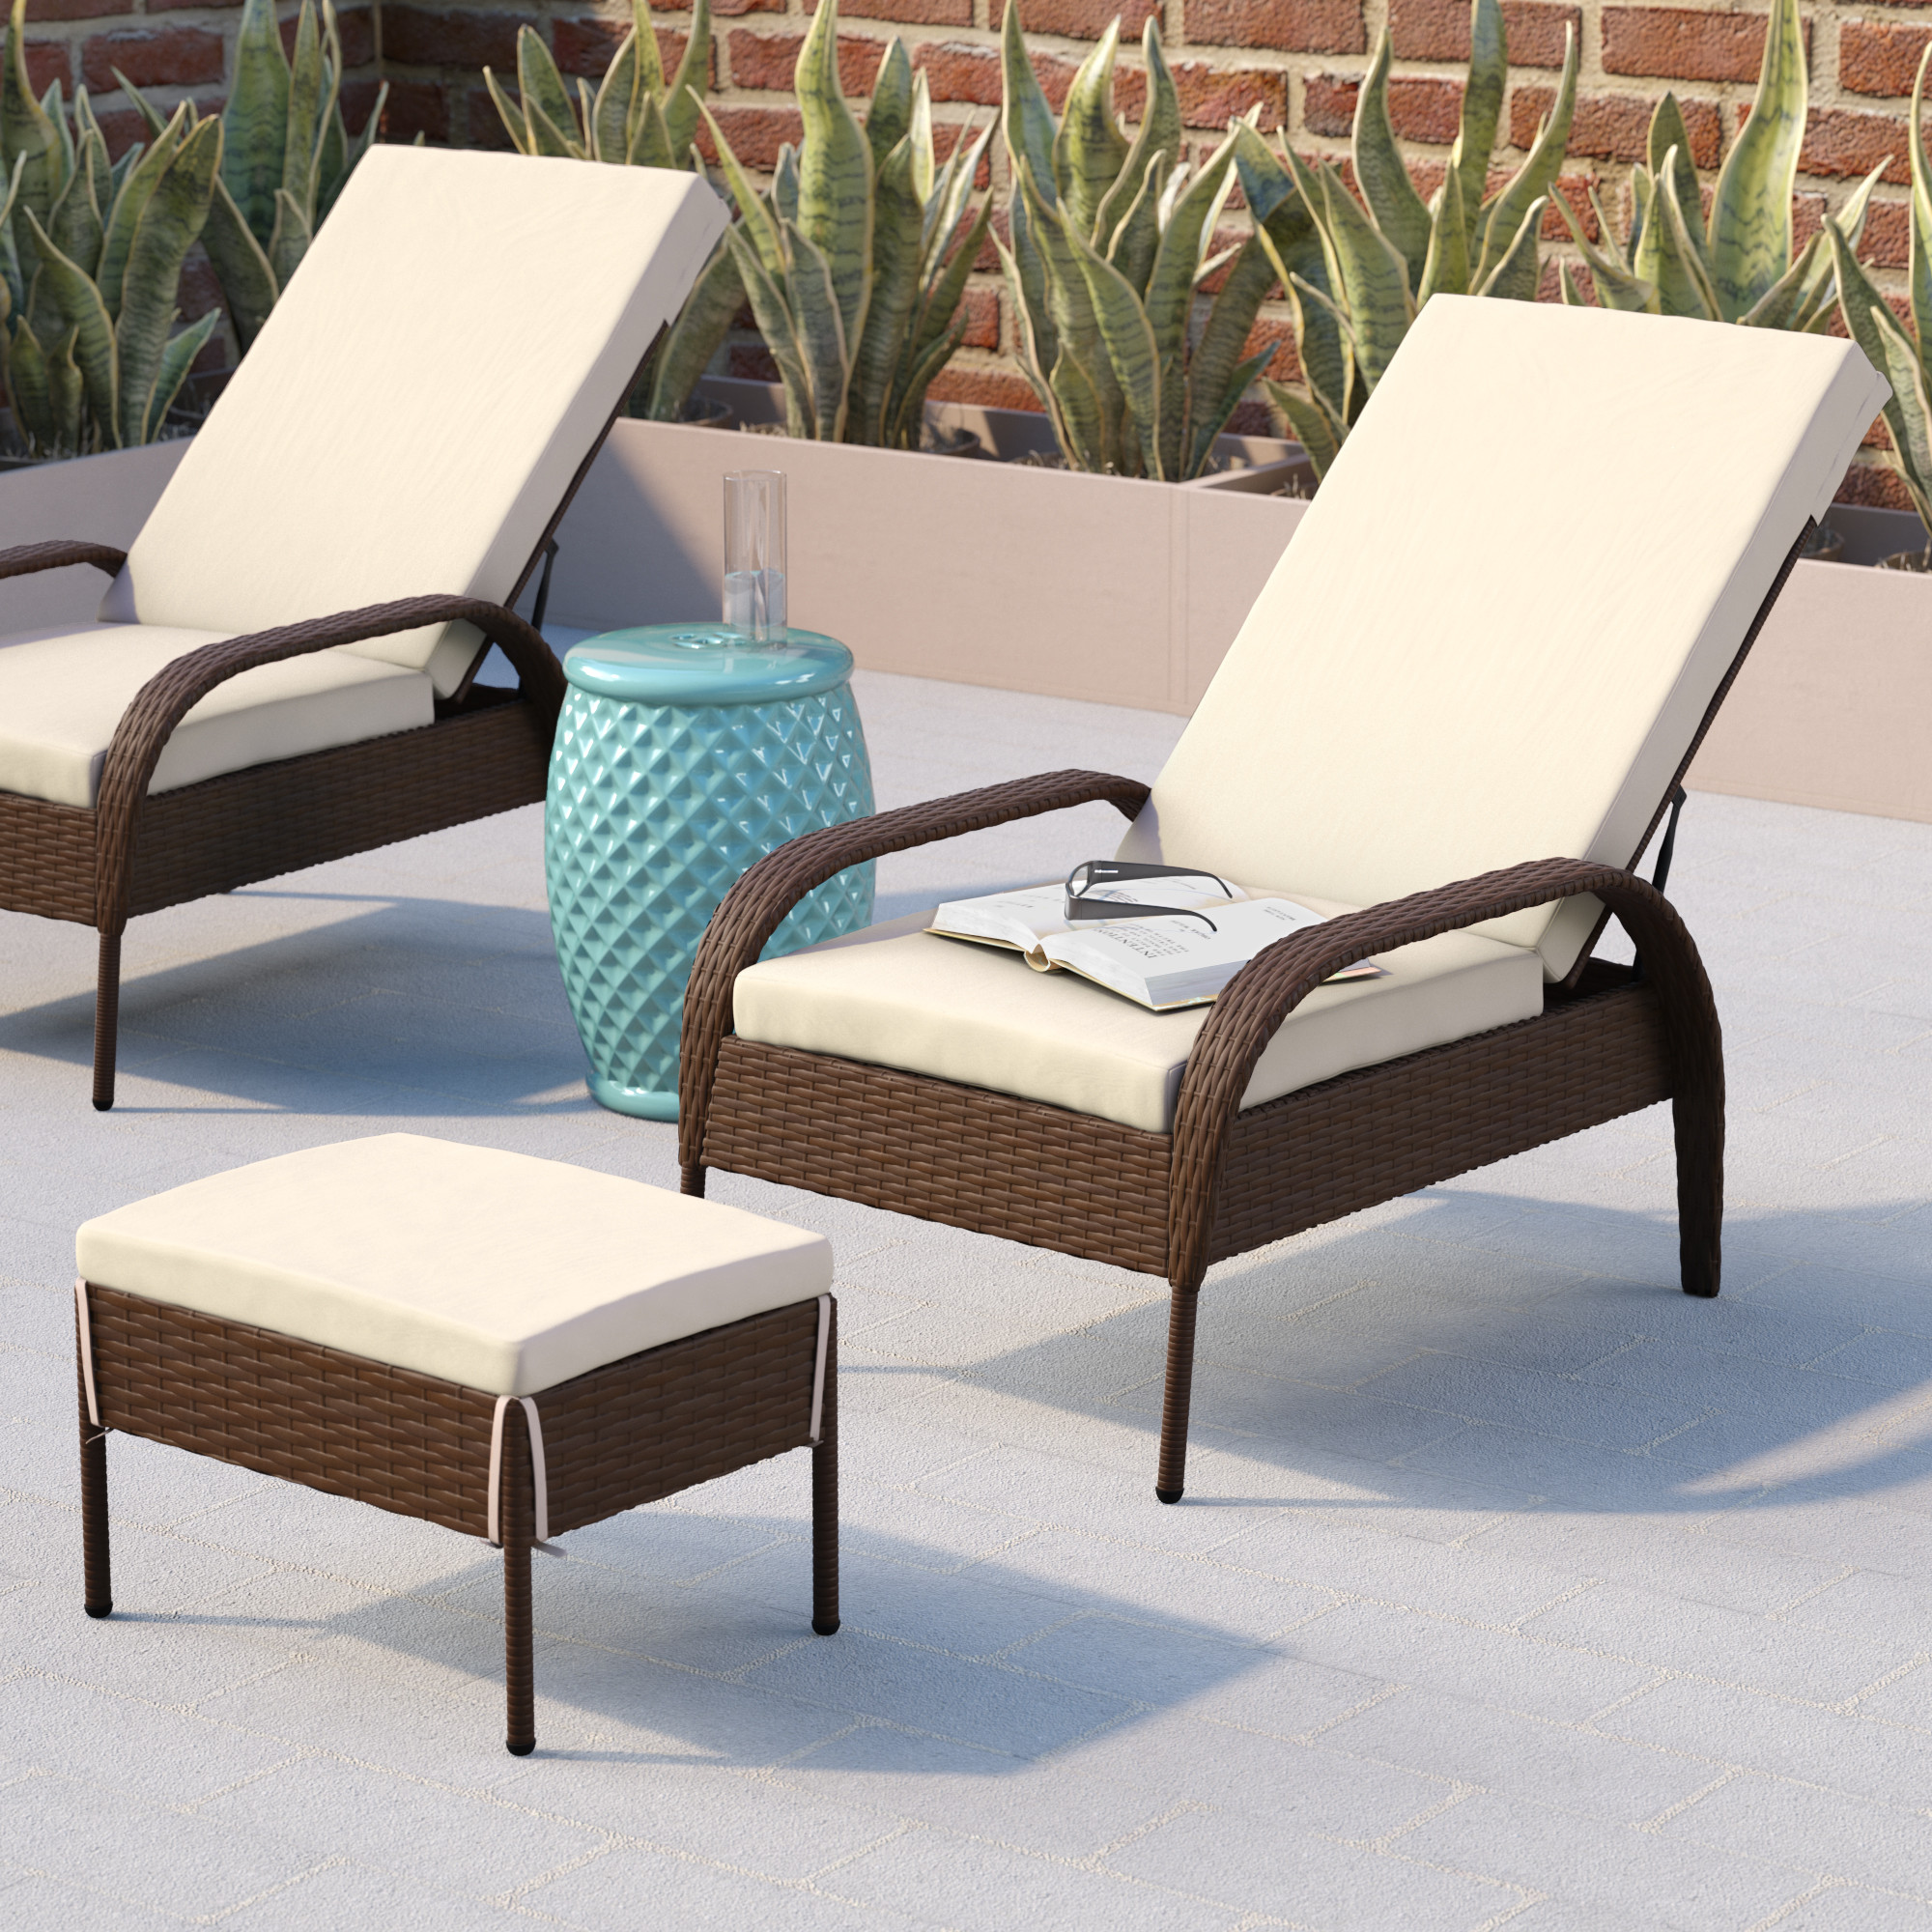 In this image I did lighting and rendering, updates to the wicker and upholstery material to improve realism and accuracy to the product, and minor other material and model updates.